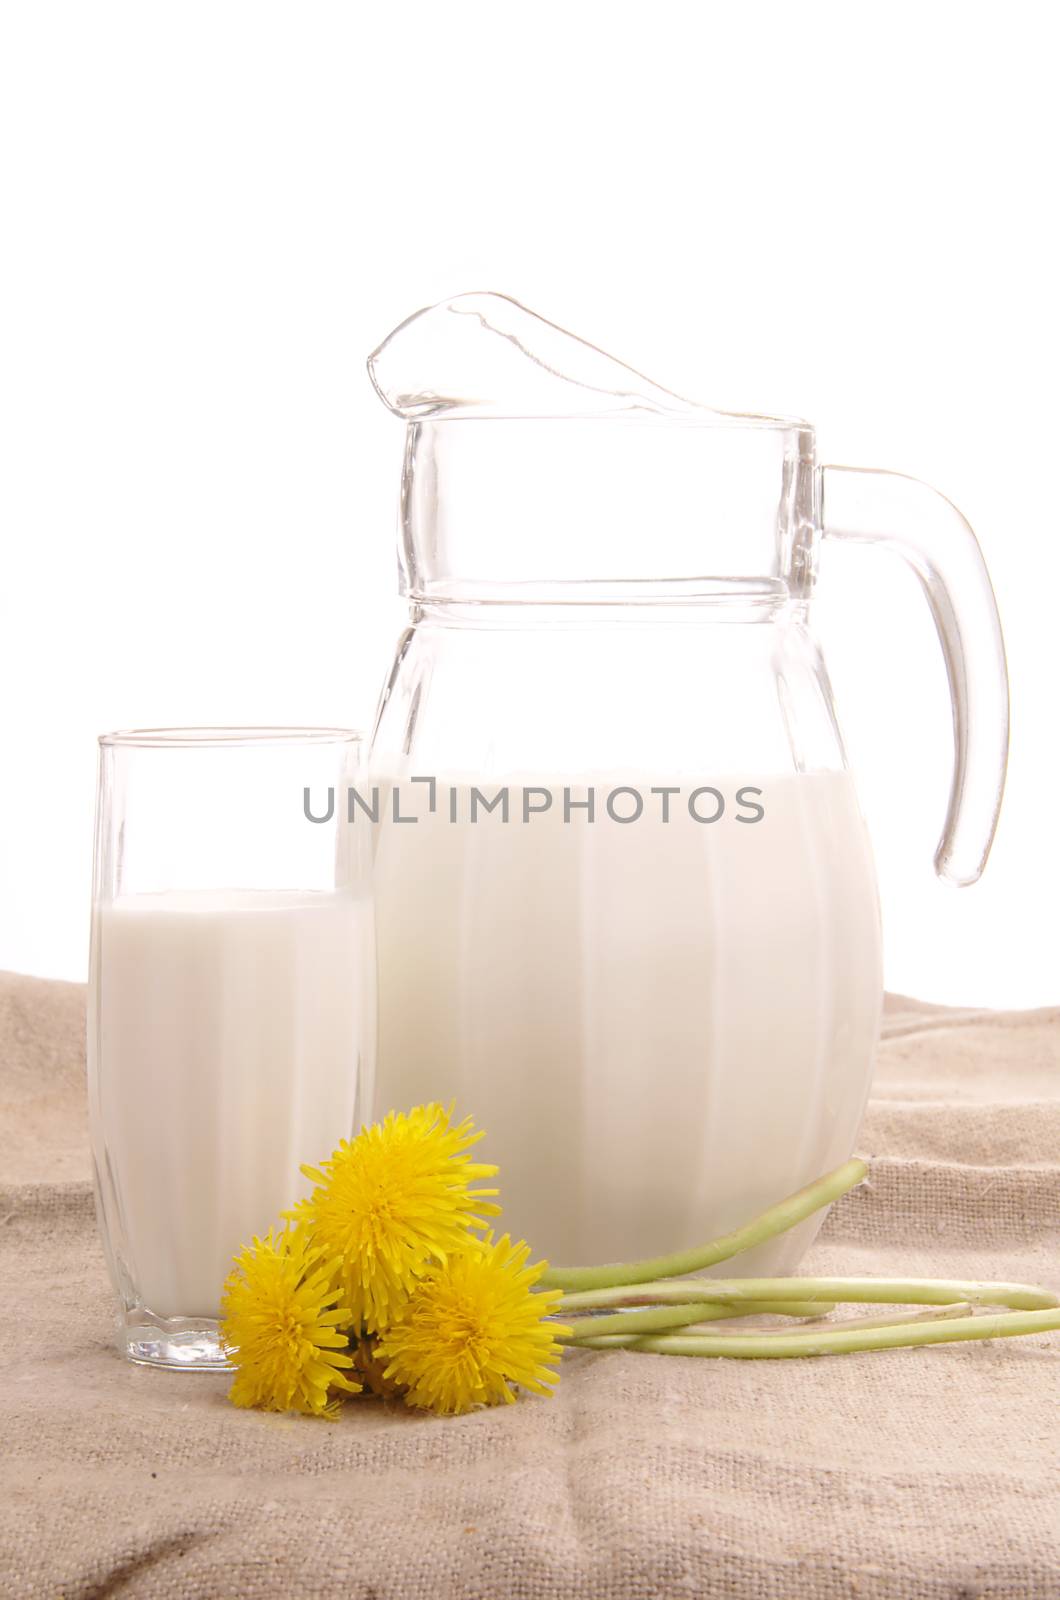 Milk jug and glass on white background